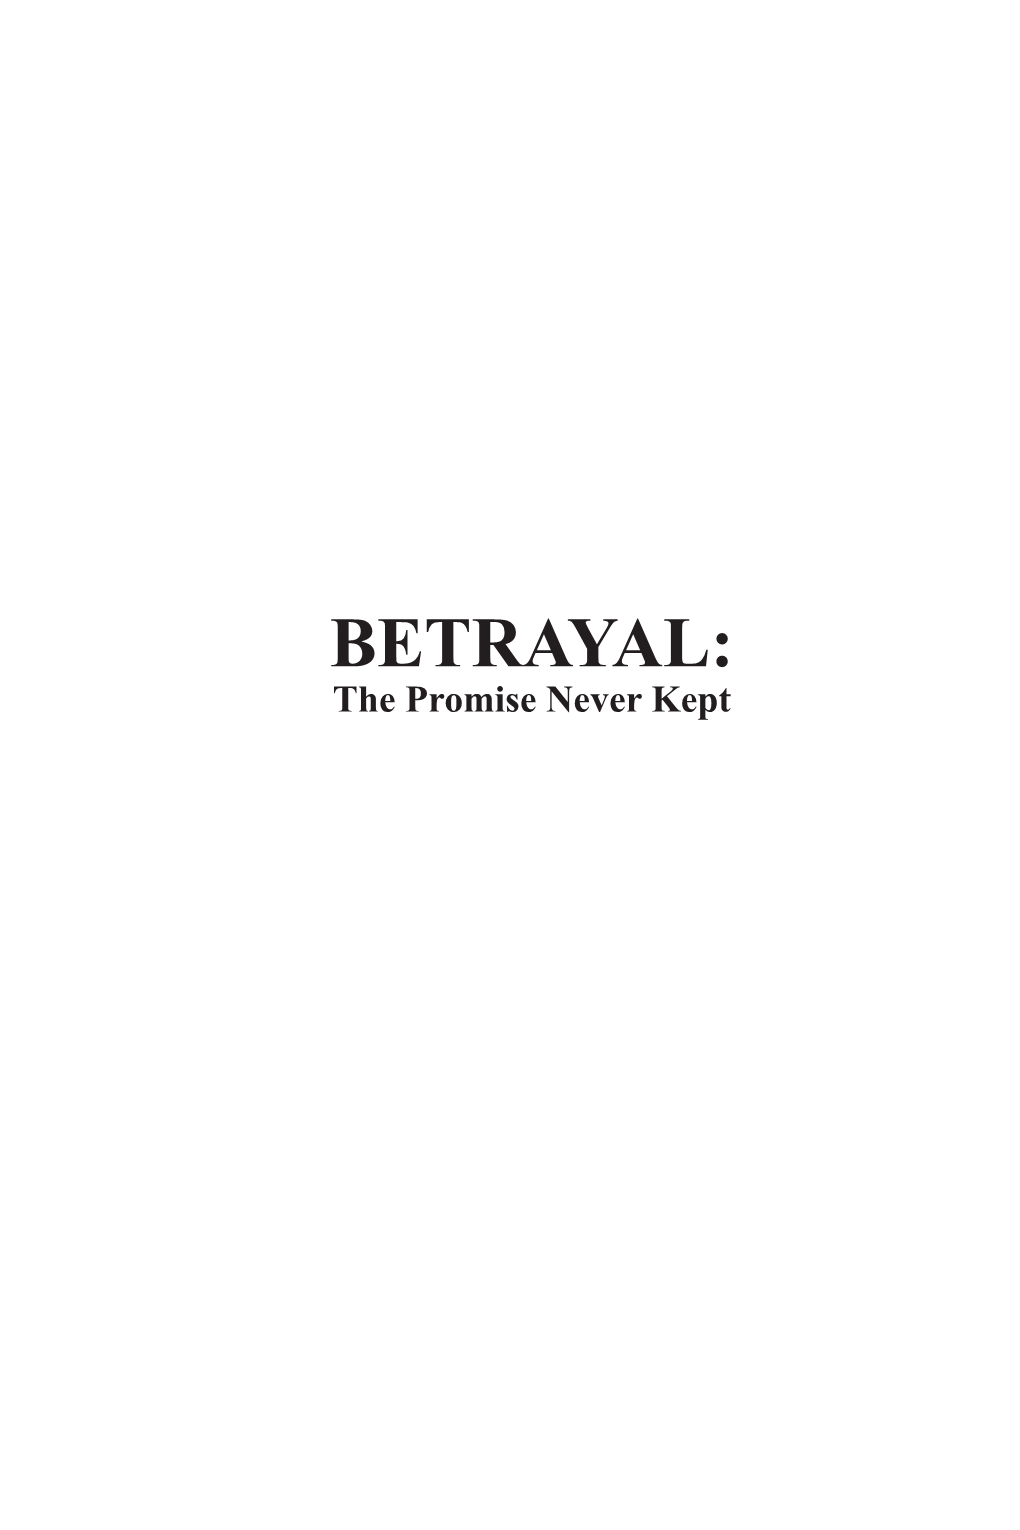 BETRAYAL: the Promise Never Kept